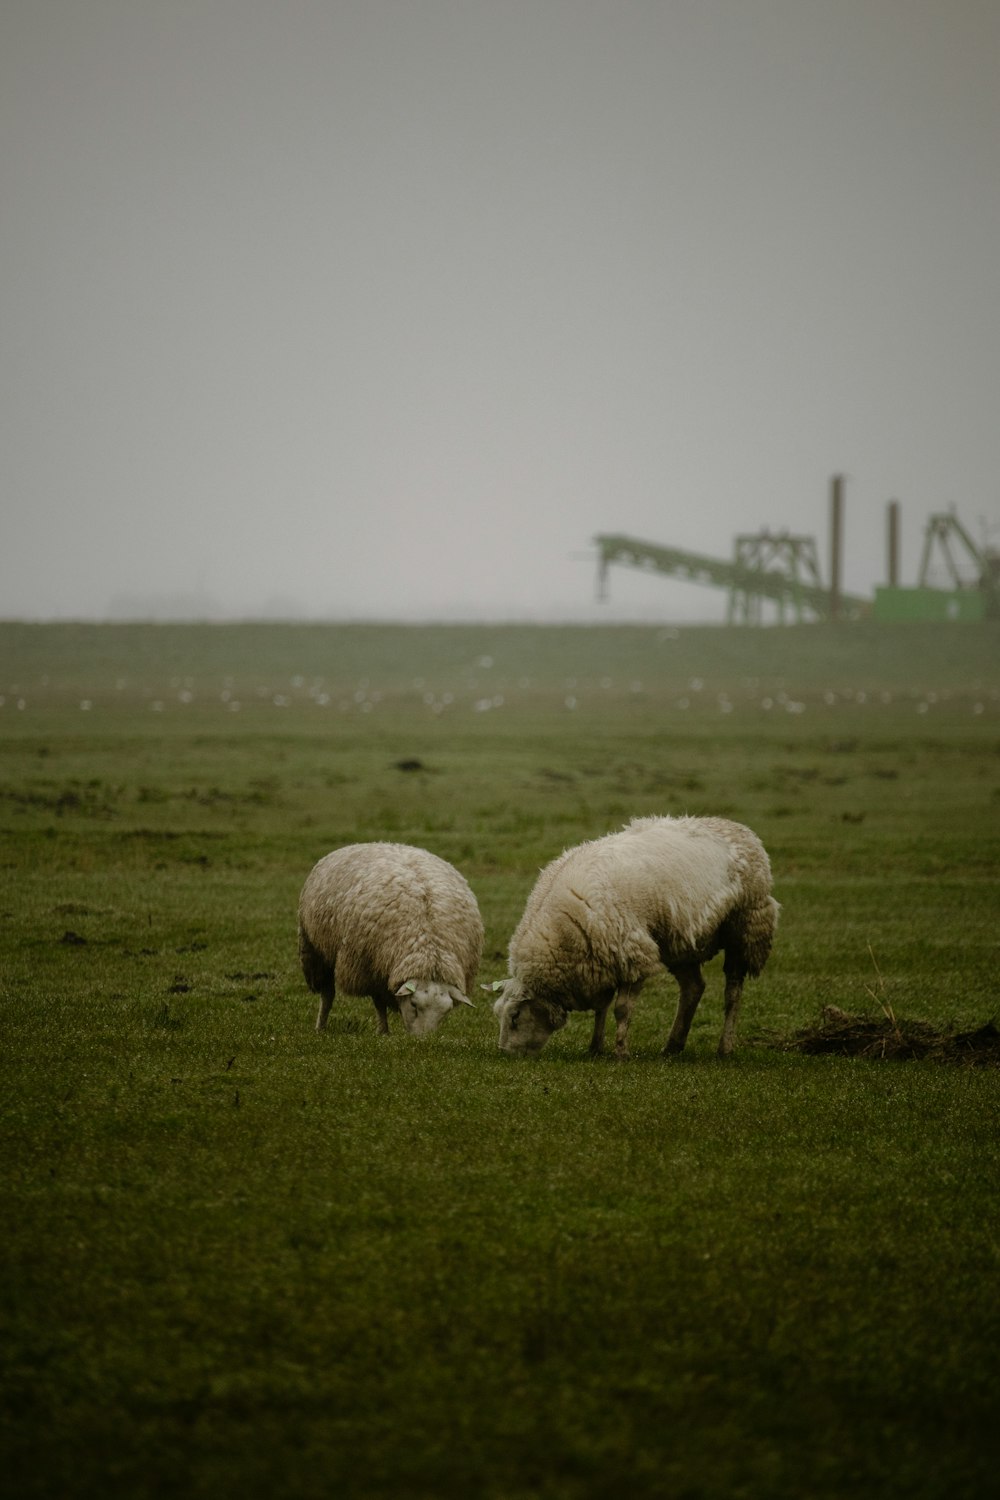 two sheep grazing in a field of grass